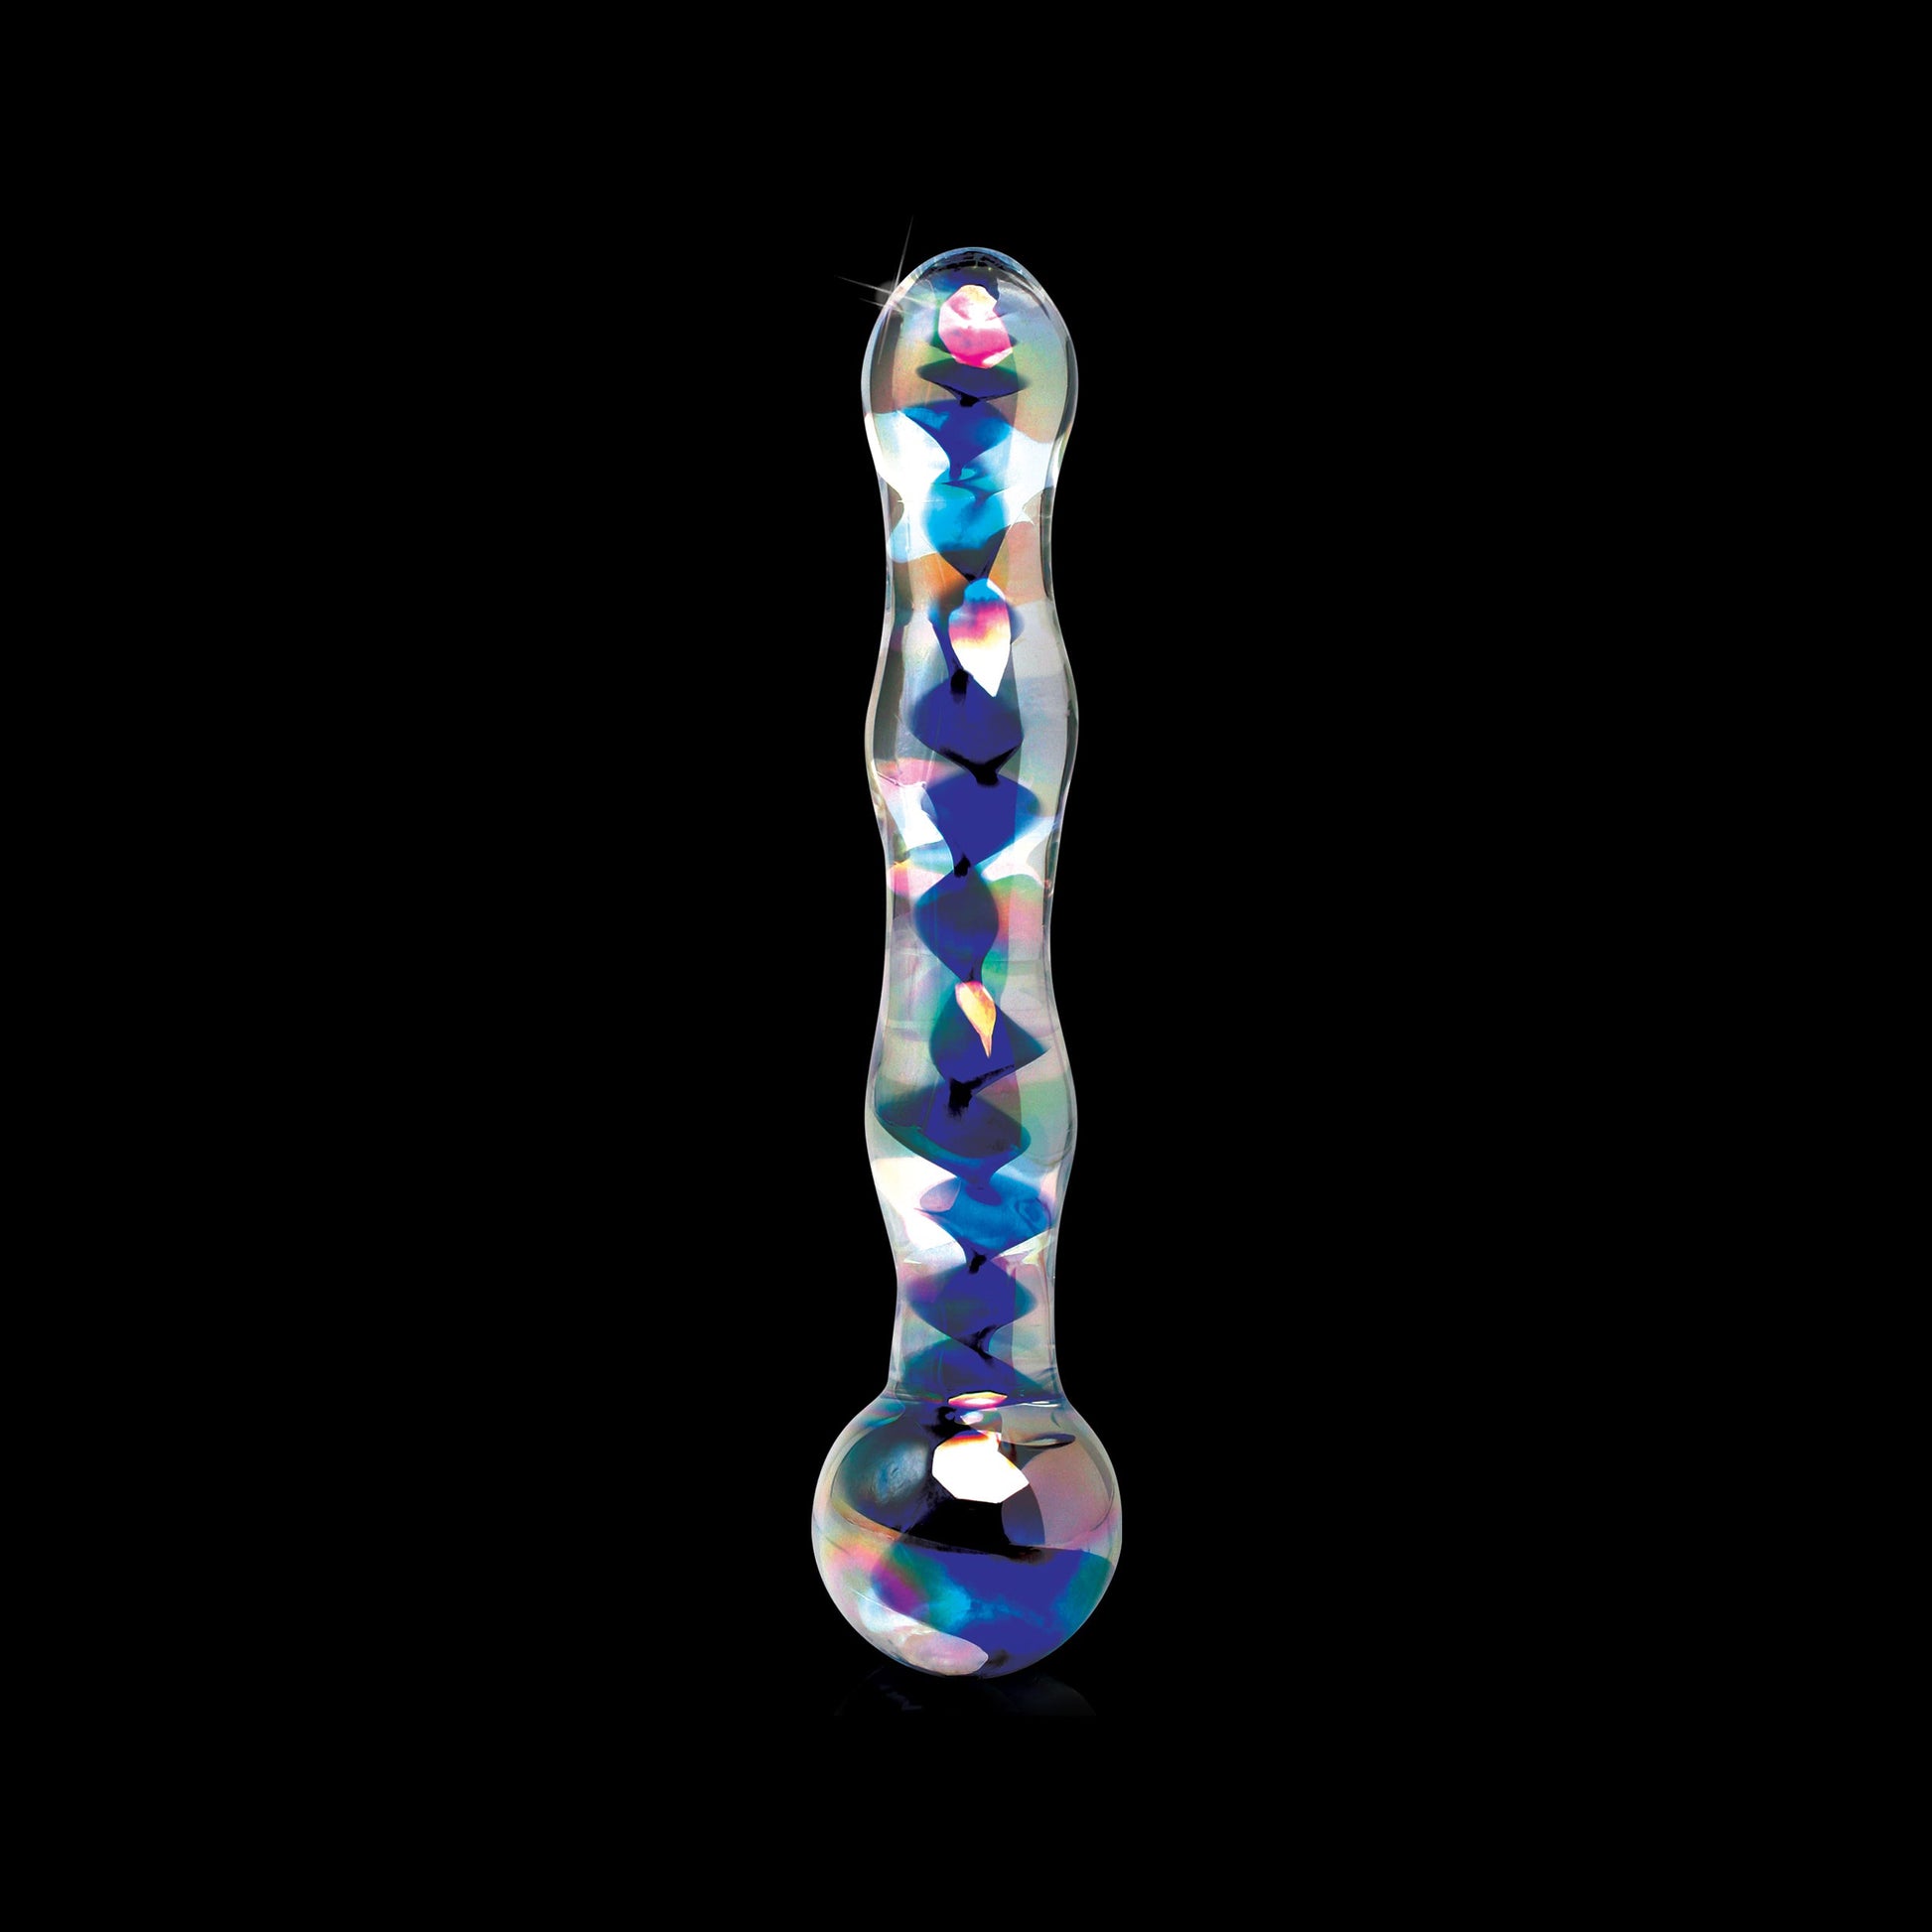 Icicles No. 8 Blue Swirls Hand Blown Glass Massager Dildo - Thorn & Feather